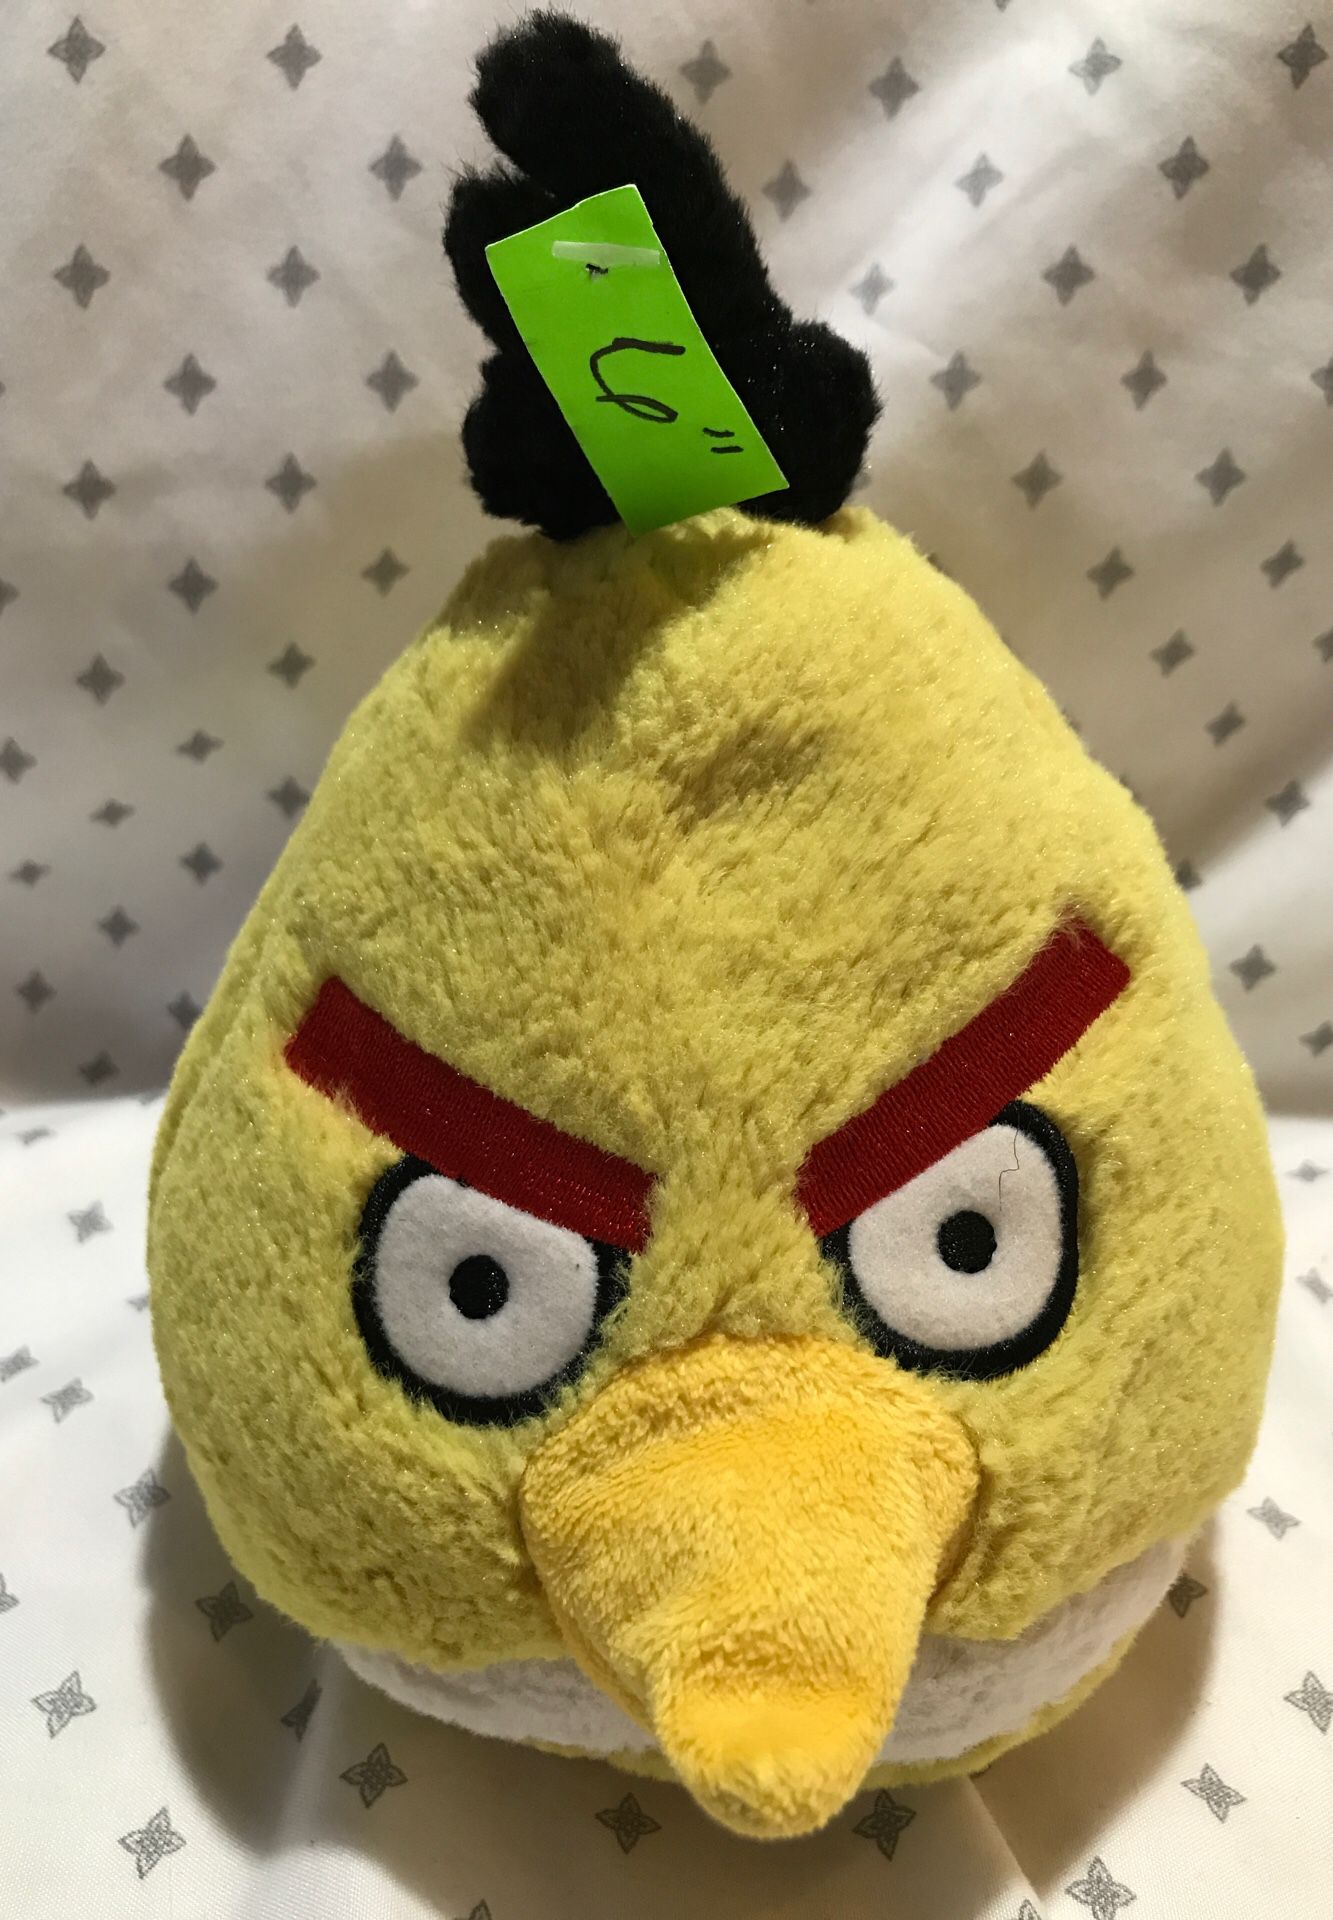 6” Angry Bird stuffed animalOpen page to see the rest